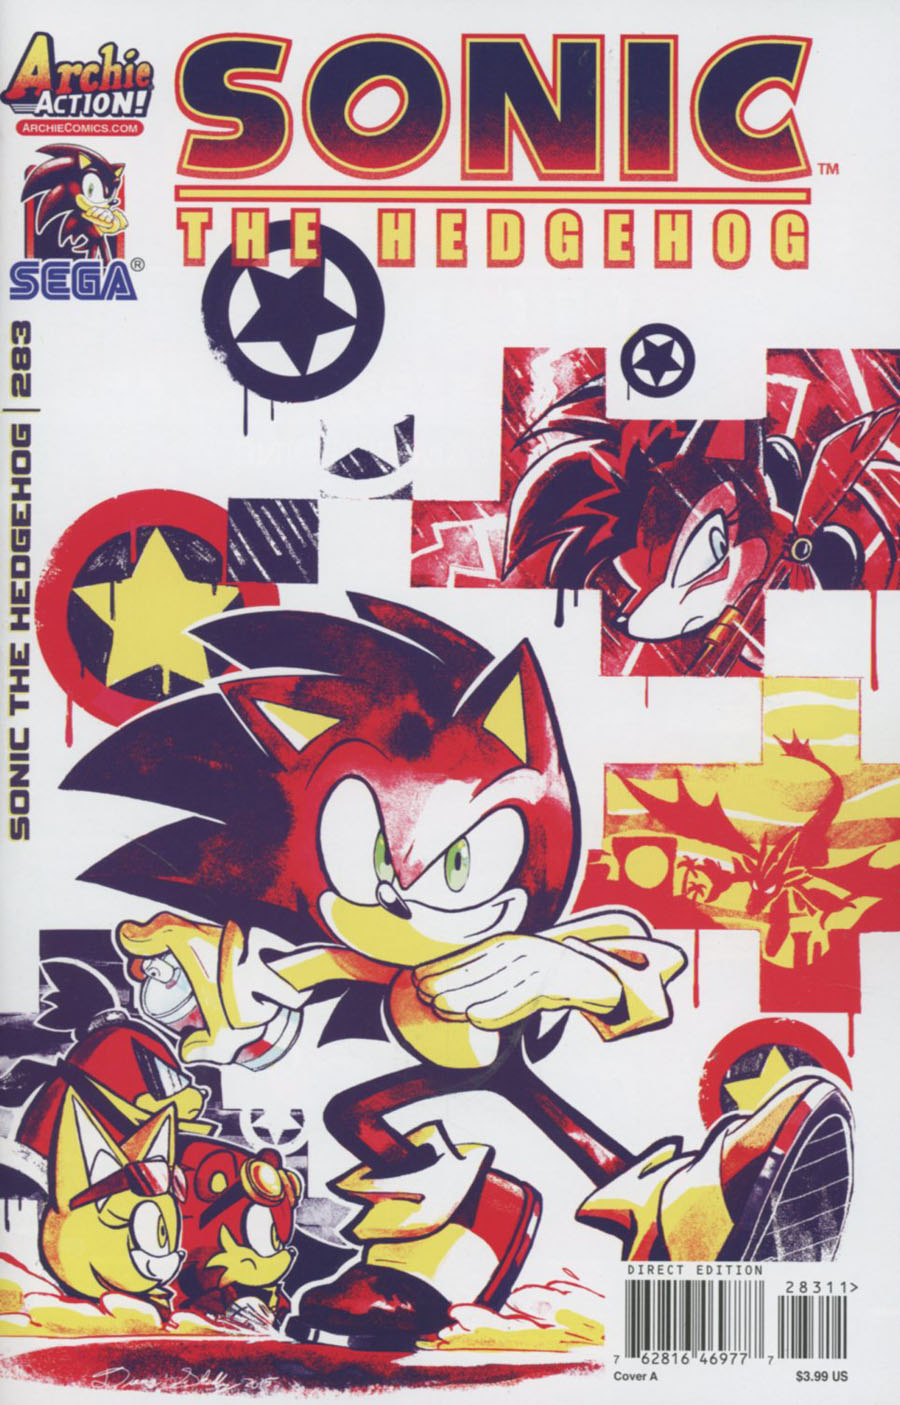 Sonic The Hedgehog Vol 2 #283 Cover A Regular Diana Skelly Cover